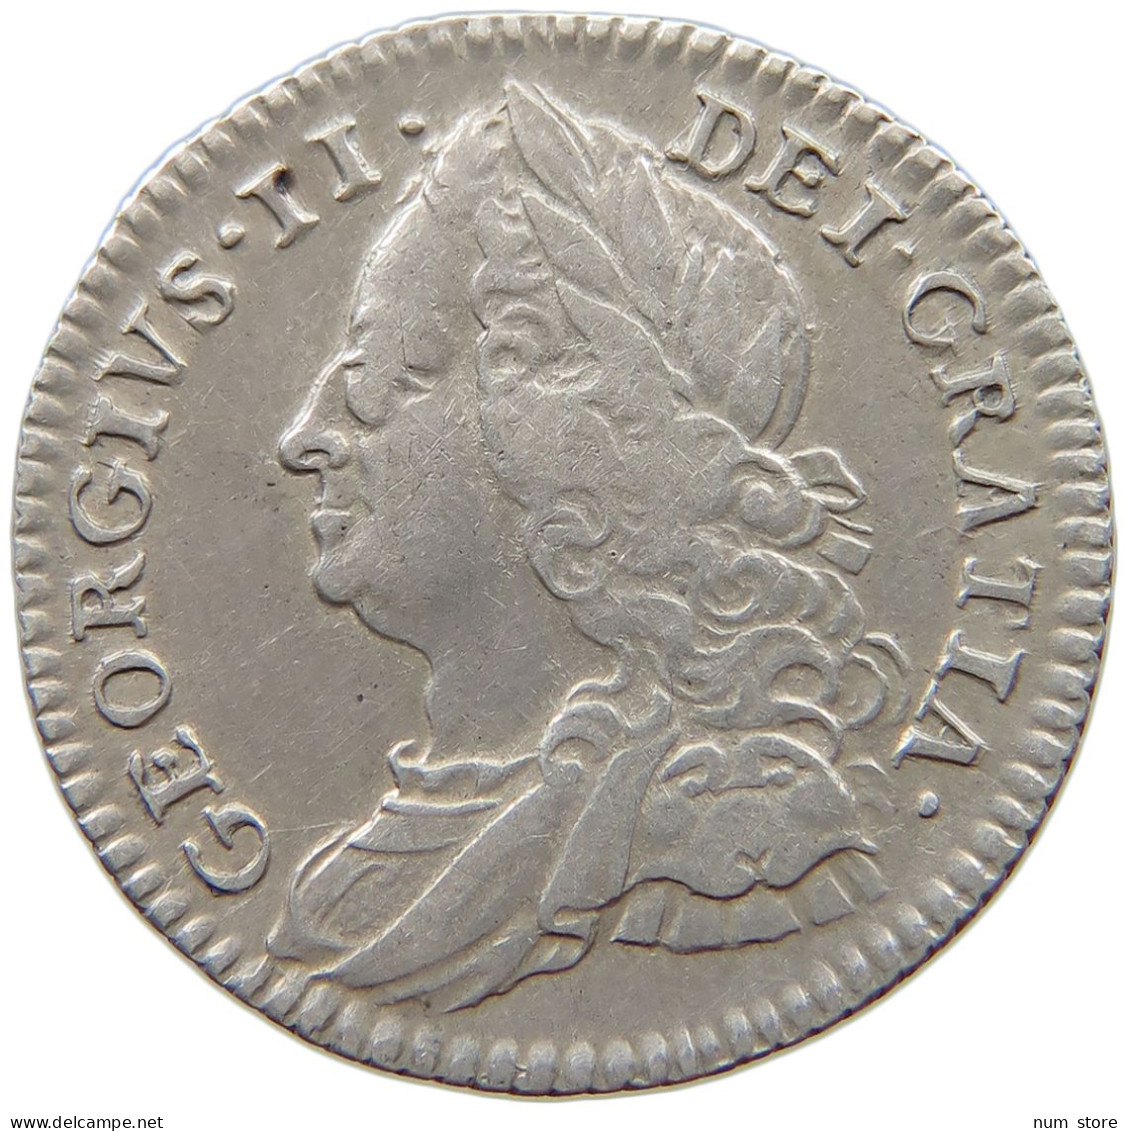 GREAT BRITAIN SIXPENCE 1750 George II. 1727-1760. #t148 0545 - G. 6 Pence